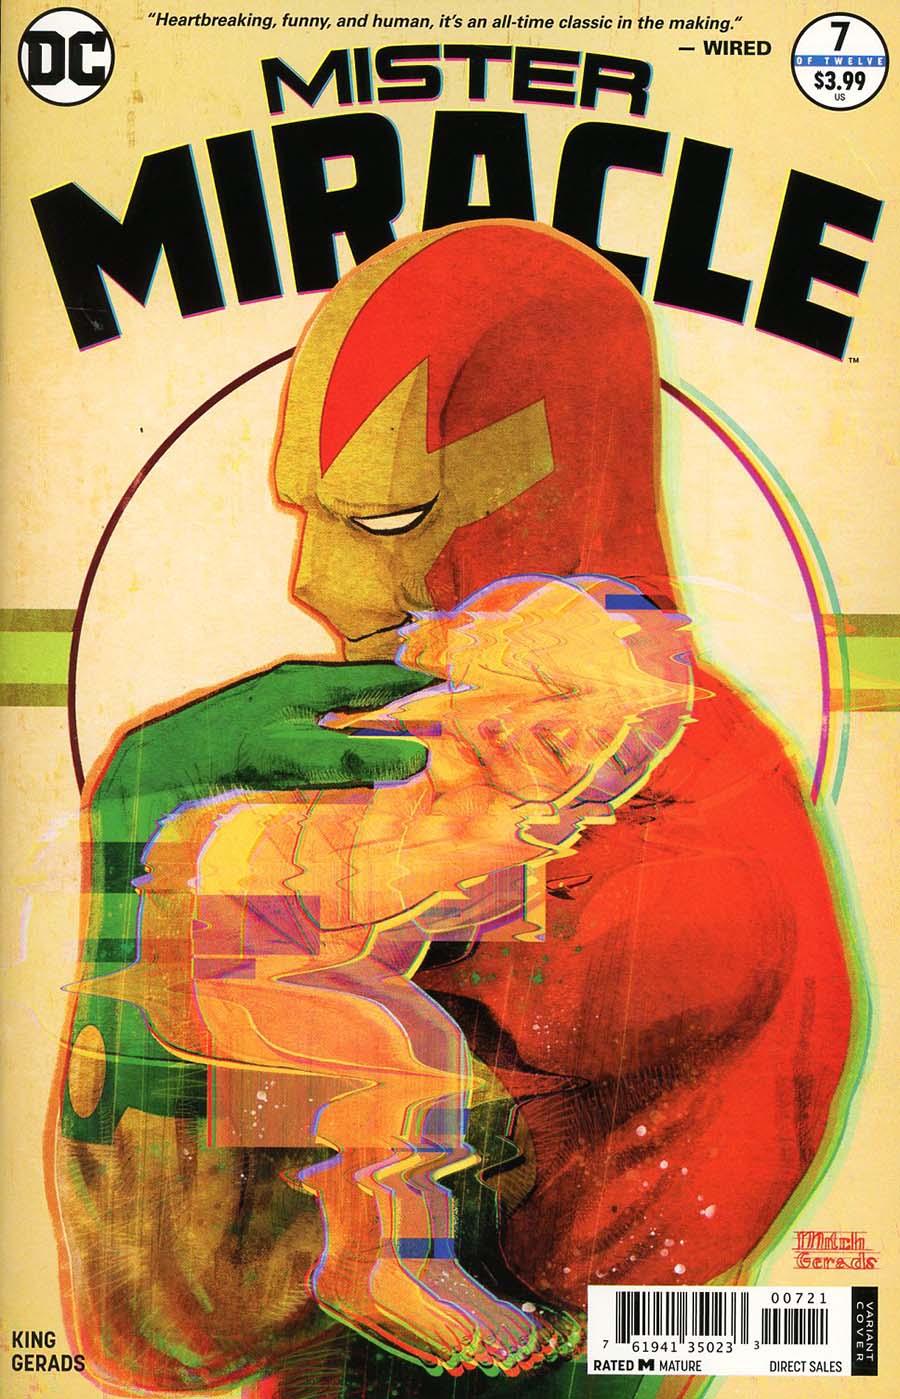 Mister Miracle Vol 4 #7 Cover B Variant Mitch Gerads Cover